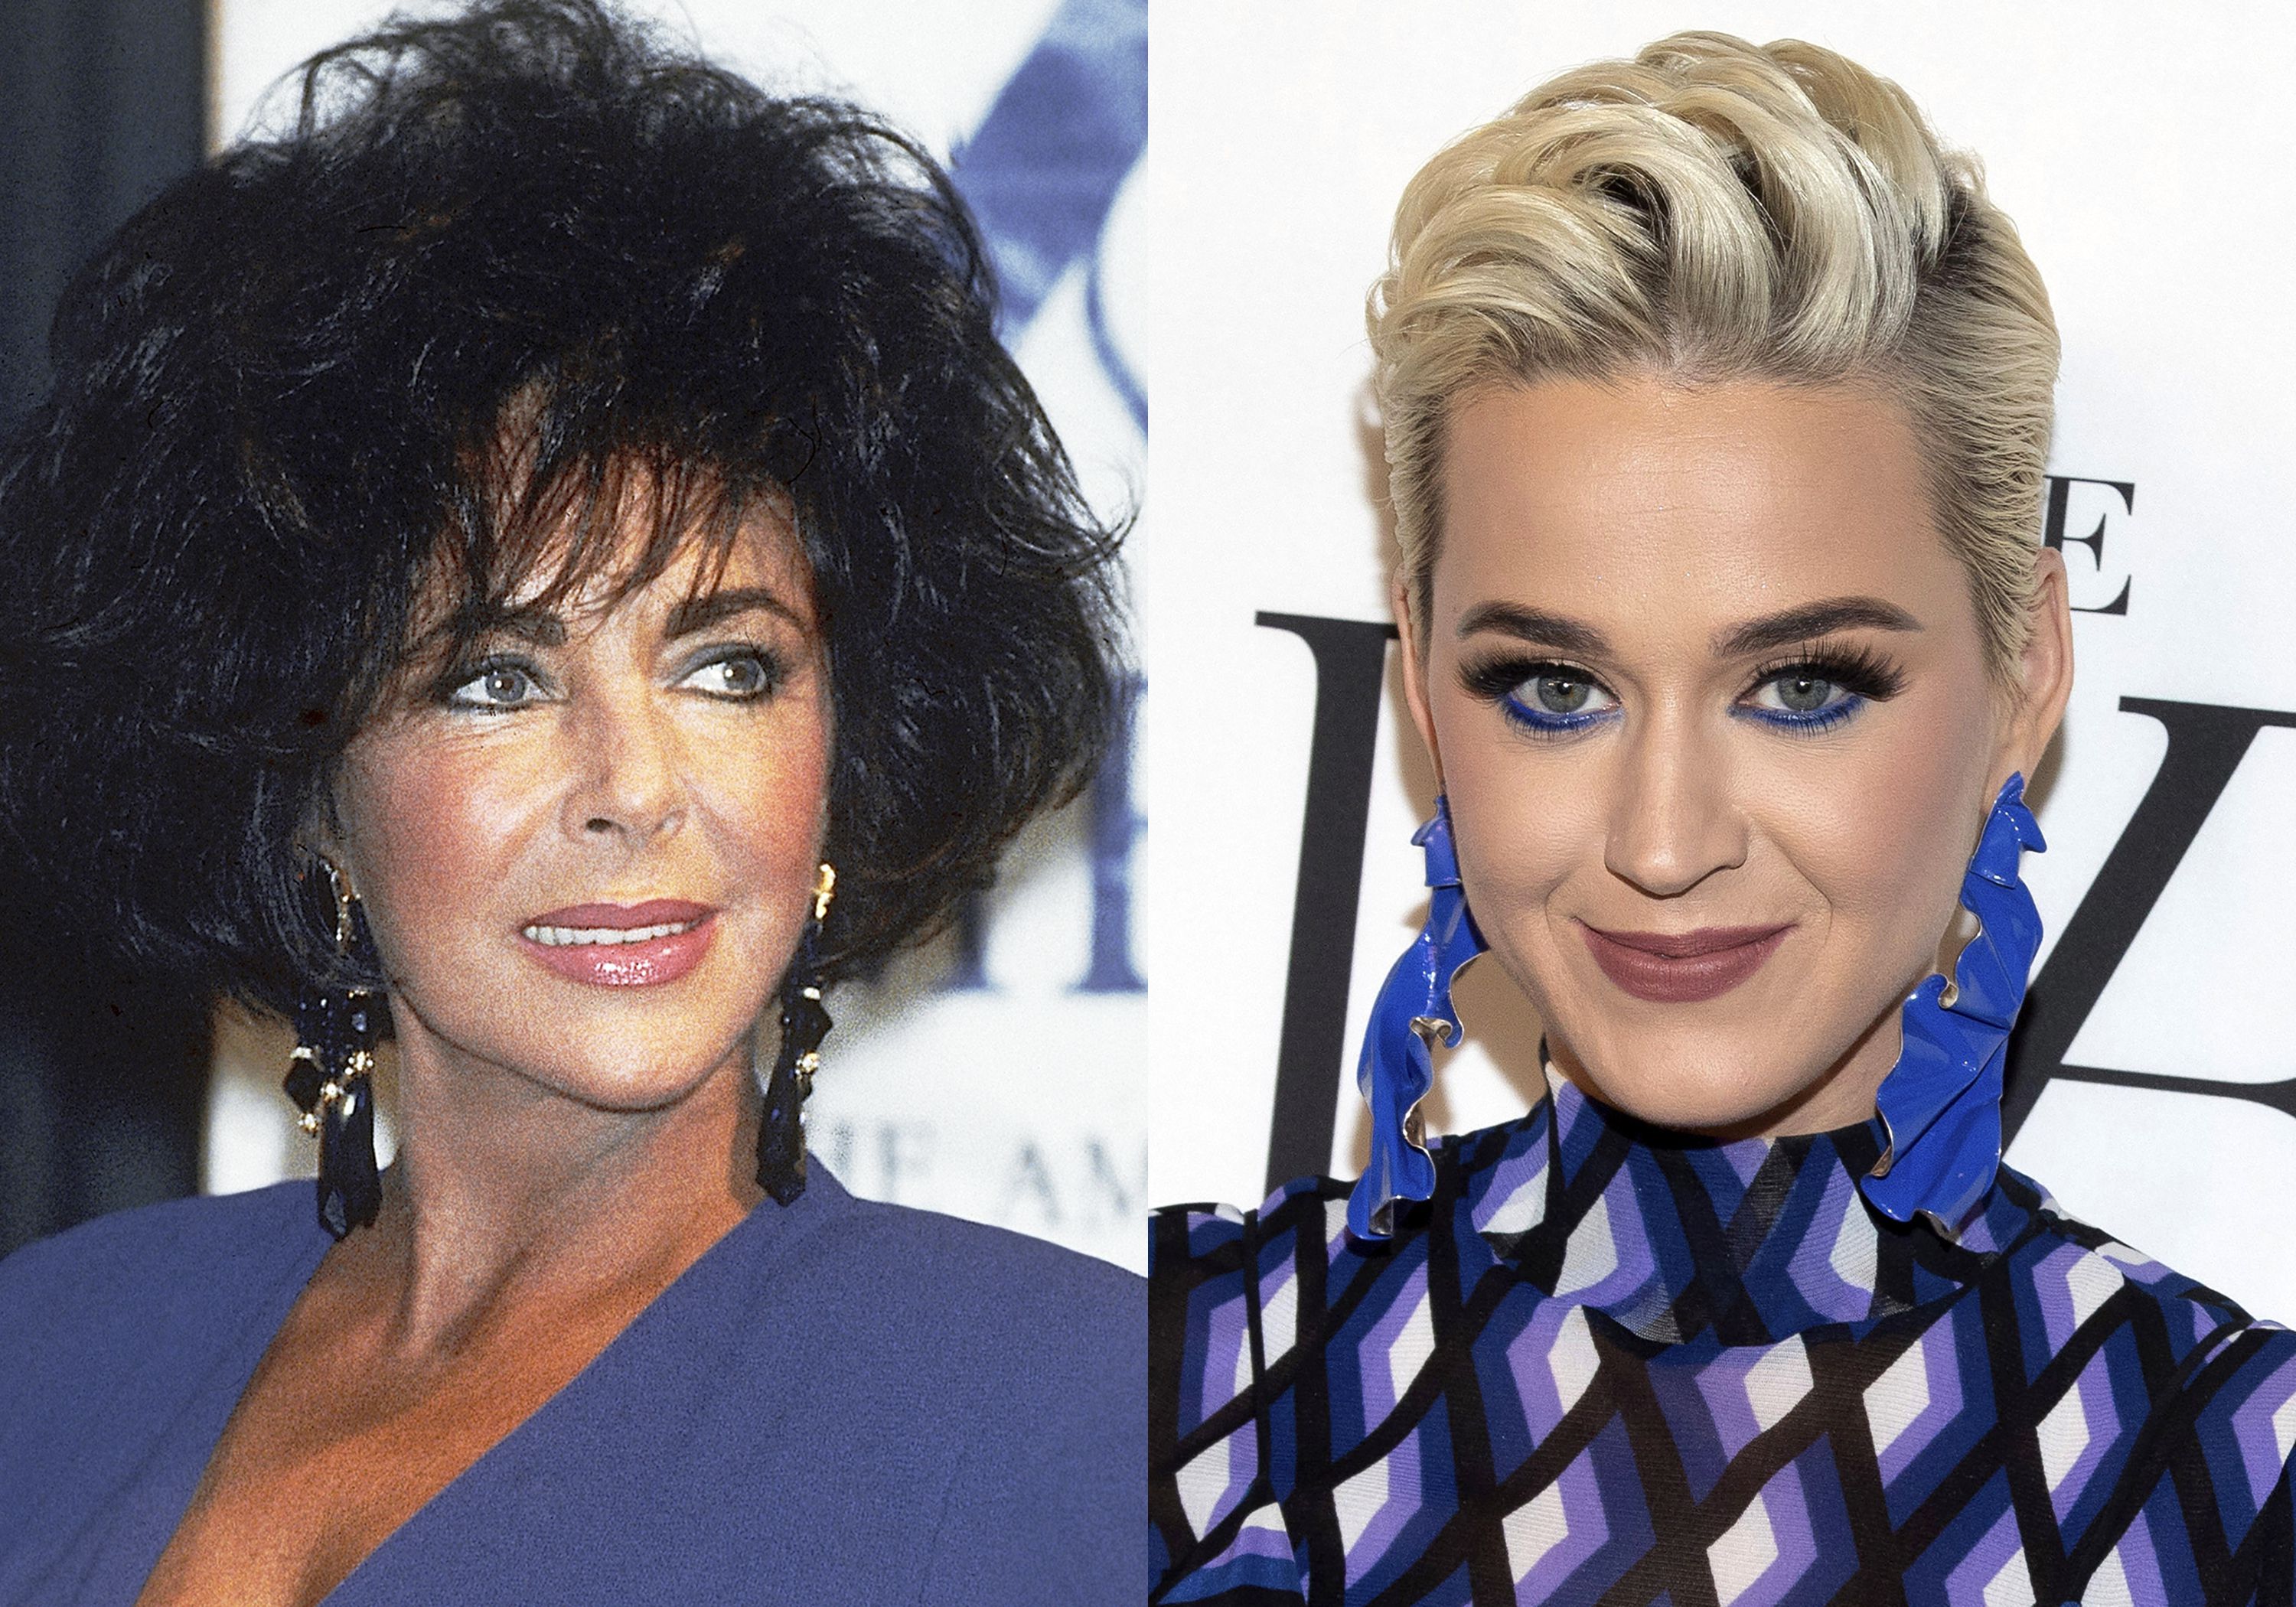 Katy Perry to narrate authorized Elizabeth Taylor podcast